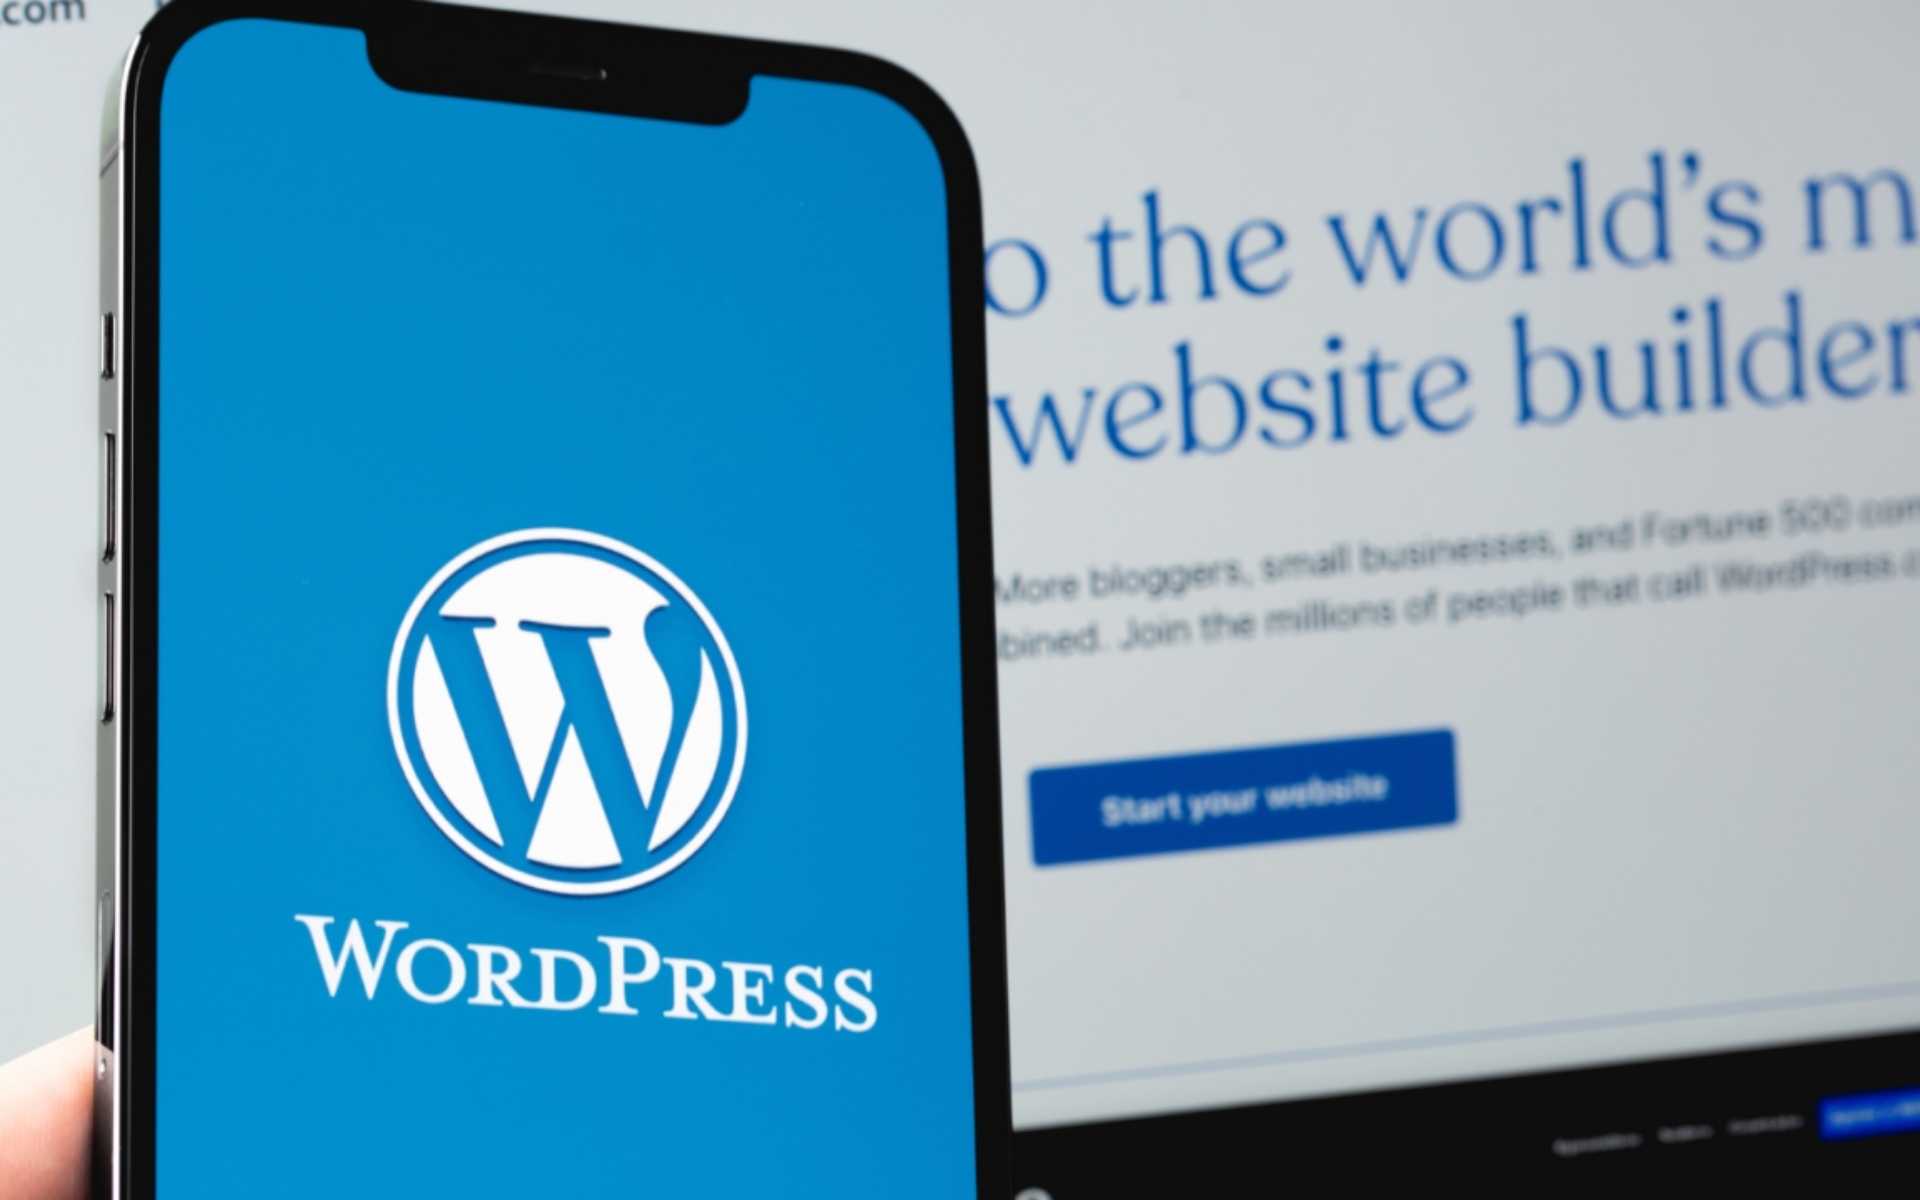 Almost 2 million websites use the Astra WordPress theme. A new theme version delivers better performance and many designs and UI improvements.